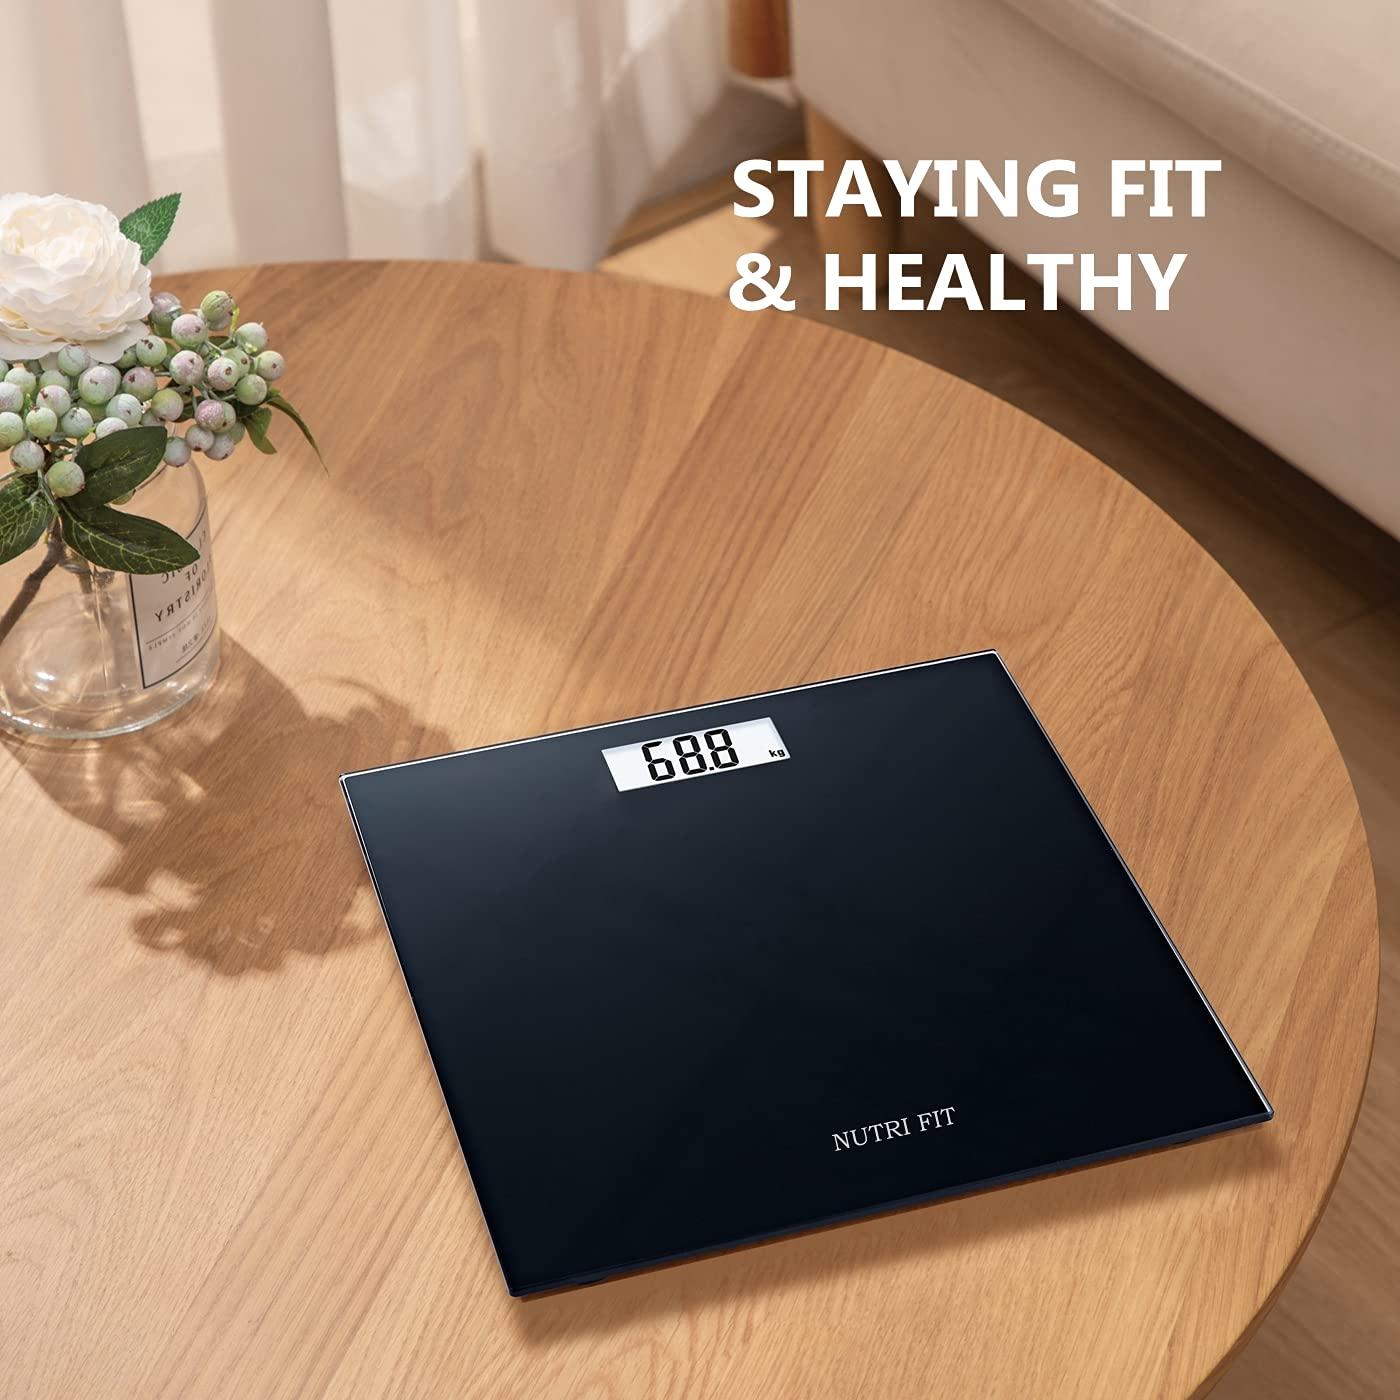  NUTRI FIT Extra-Wide/Ultra-Thick Digital Body Weight Bathroom  Scale with 3 Inch Large Easy Read Backlit LCD Display Max Capacity 400lb  Step-on Technology, Black : Health & Household